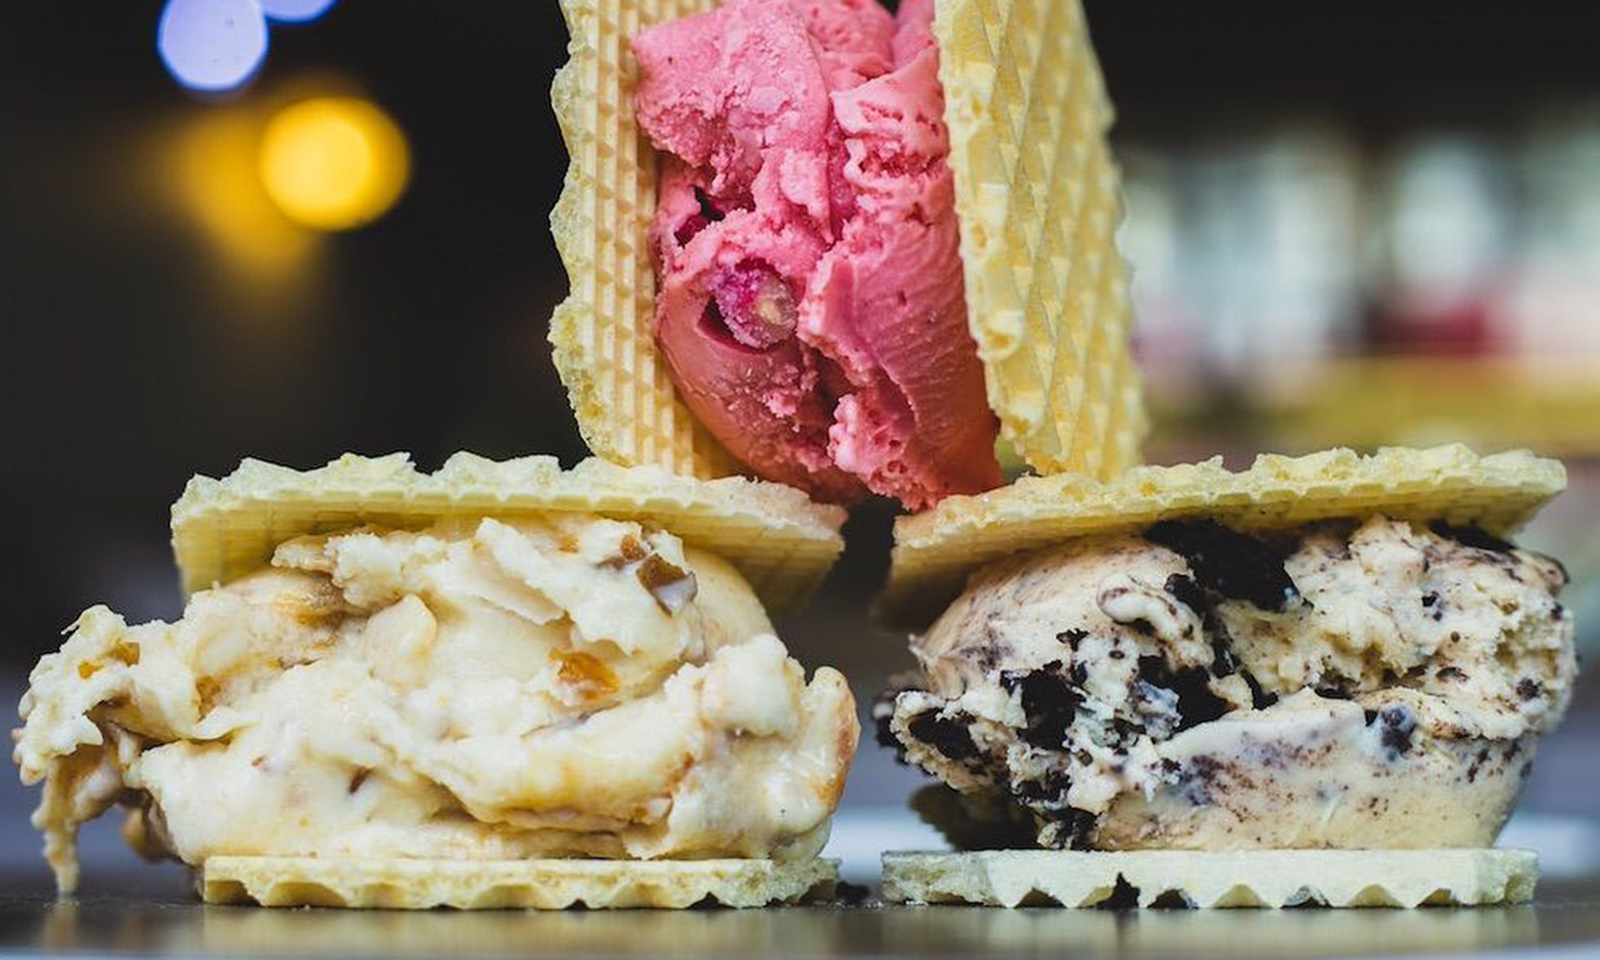 It’s July, let’s all scream for ice cream